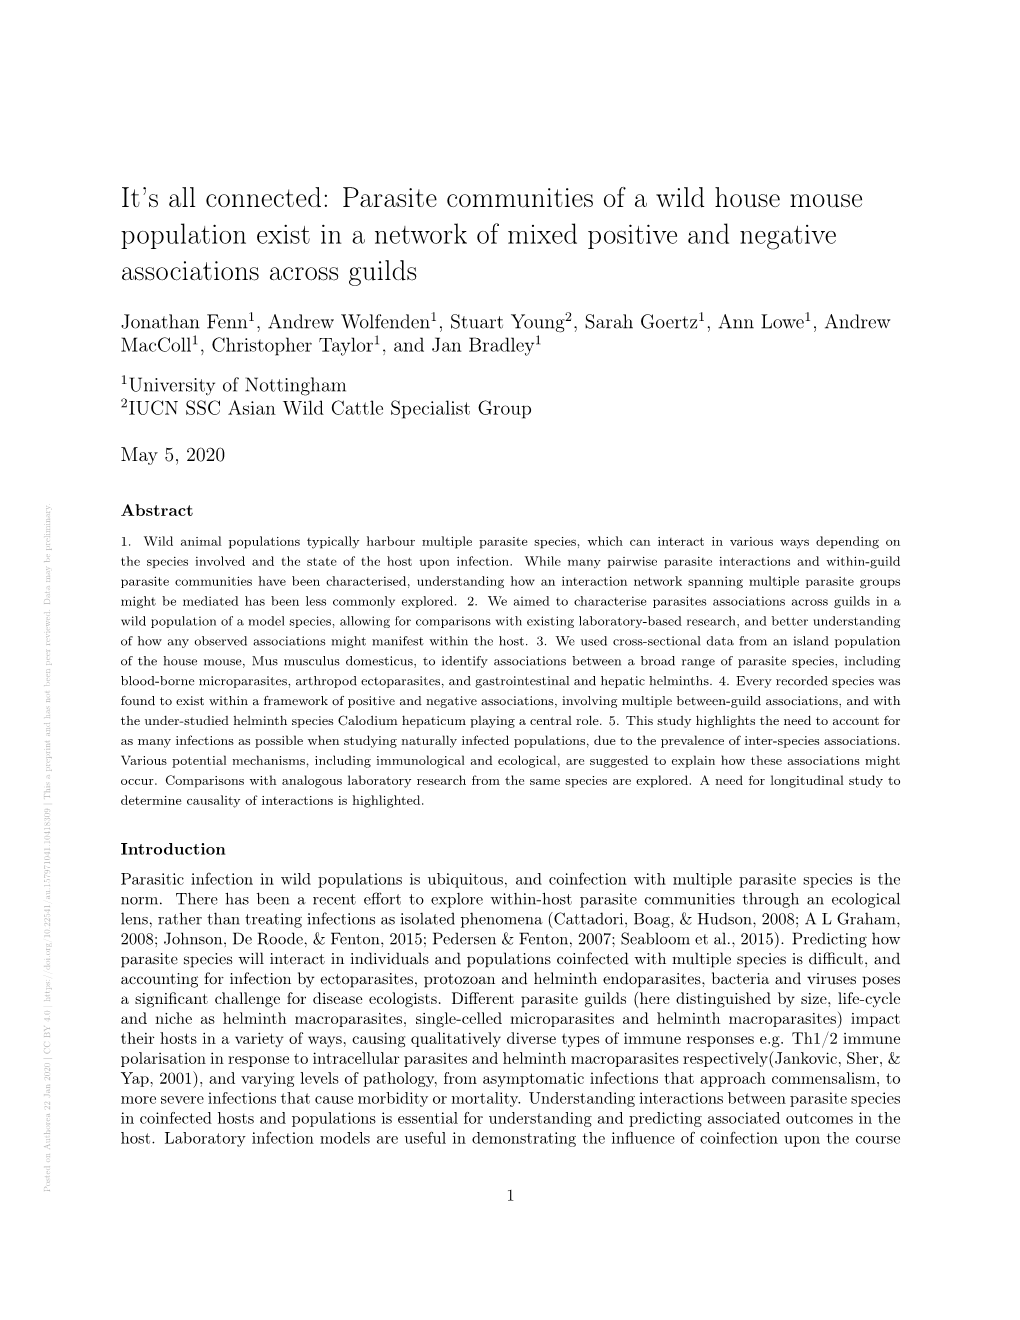 Parasite Communities of a Wild House Mouse Population Exist in a Network